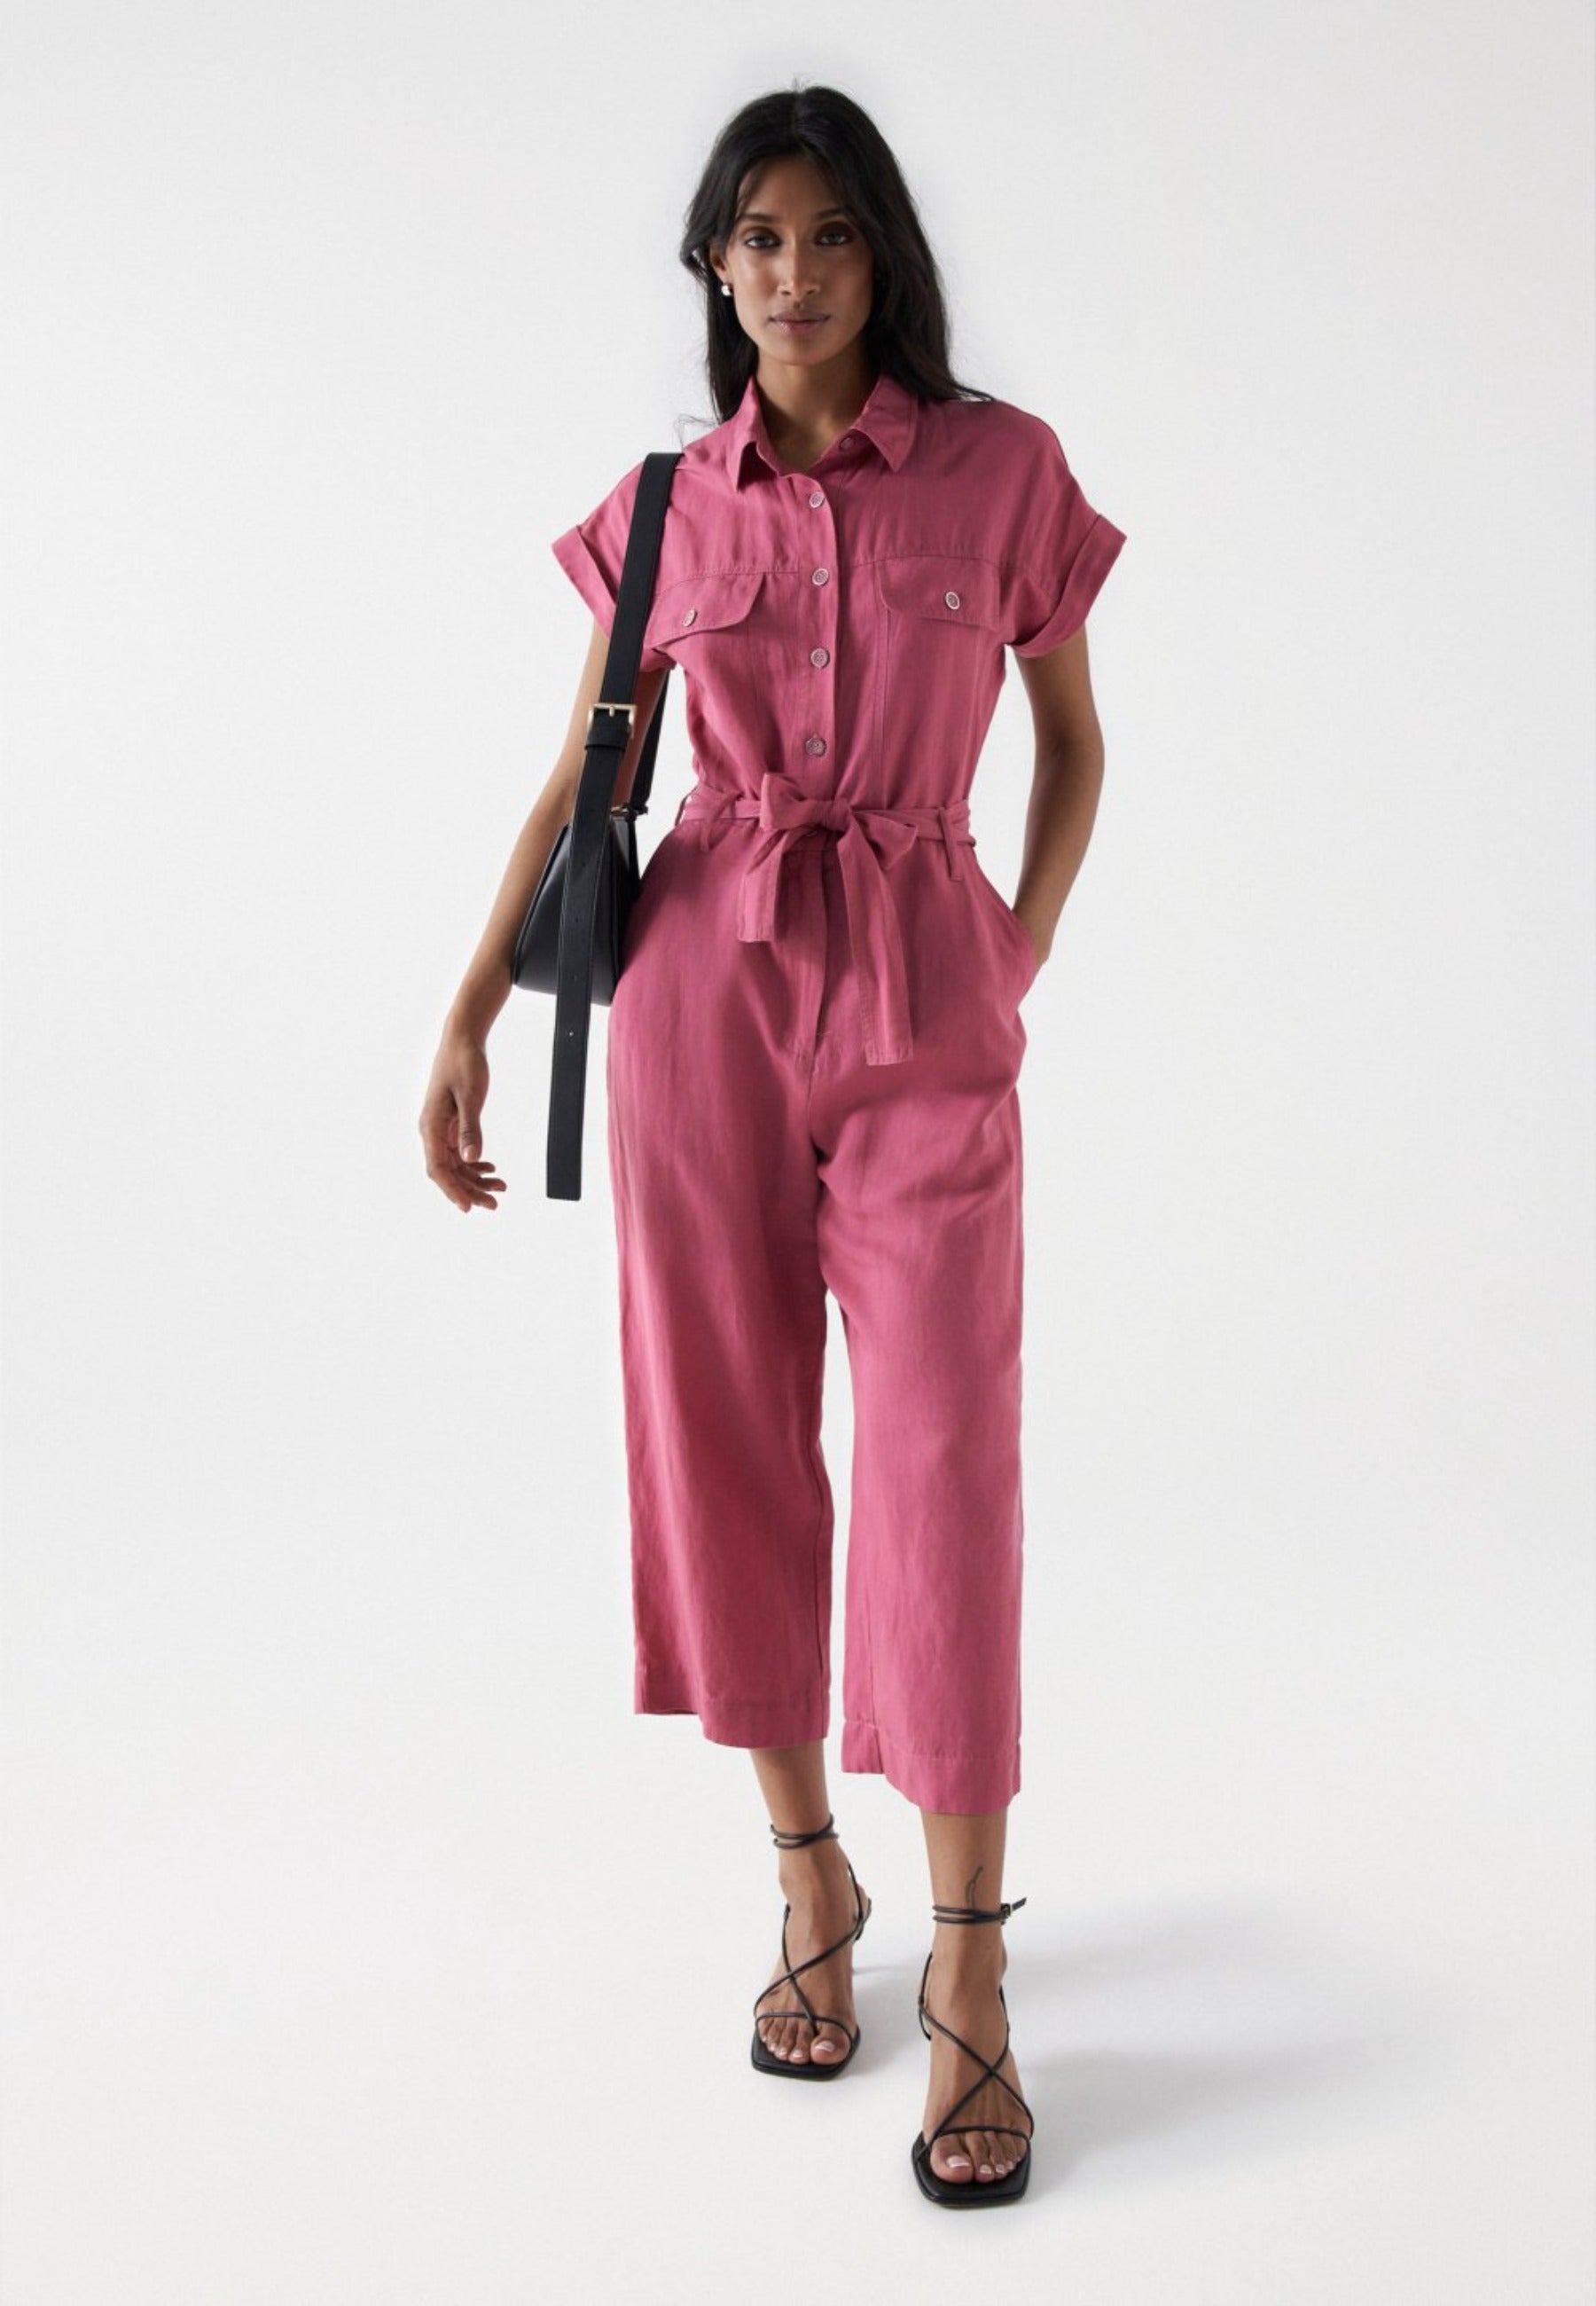 Overall Colour in Pink Overall Salsa Jeans   